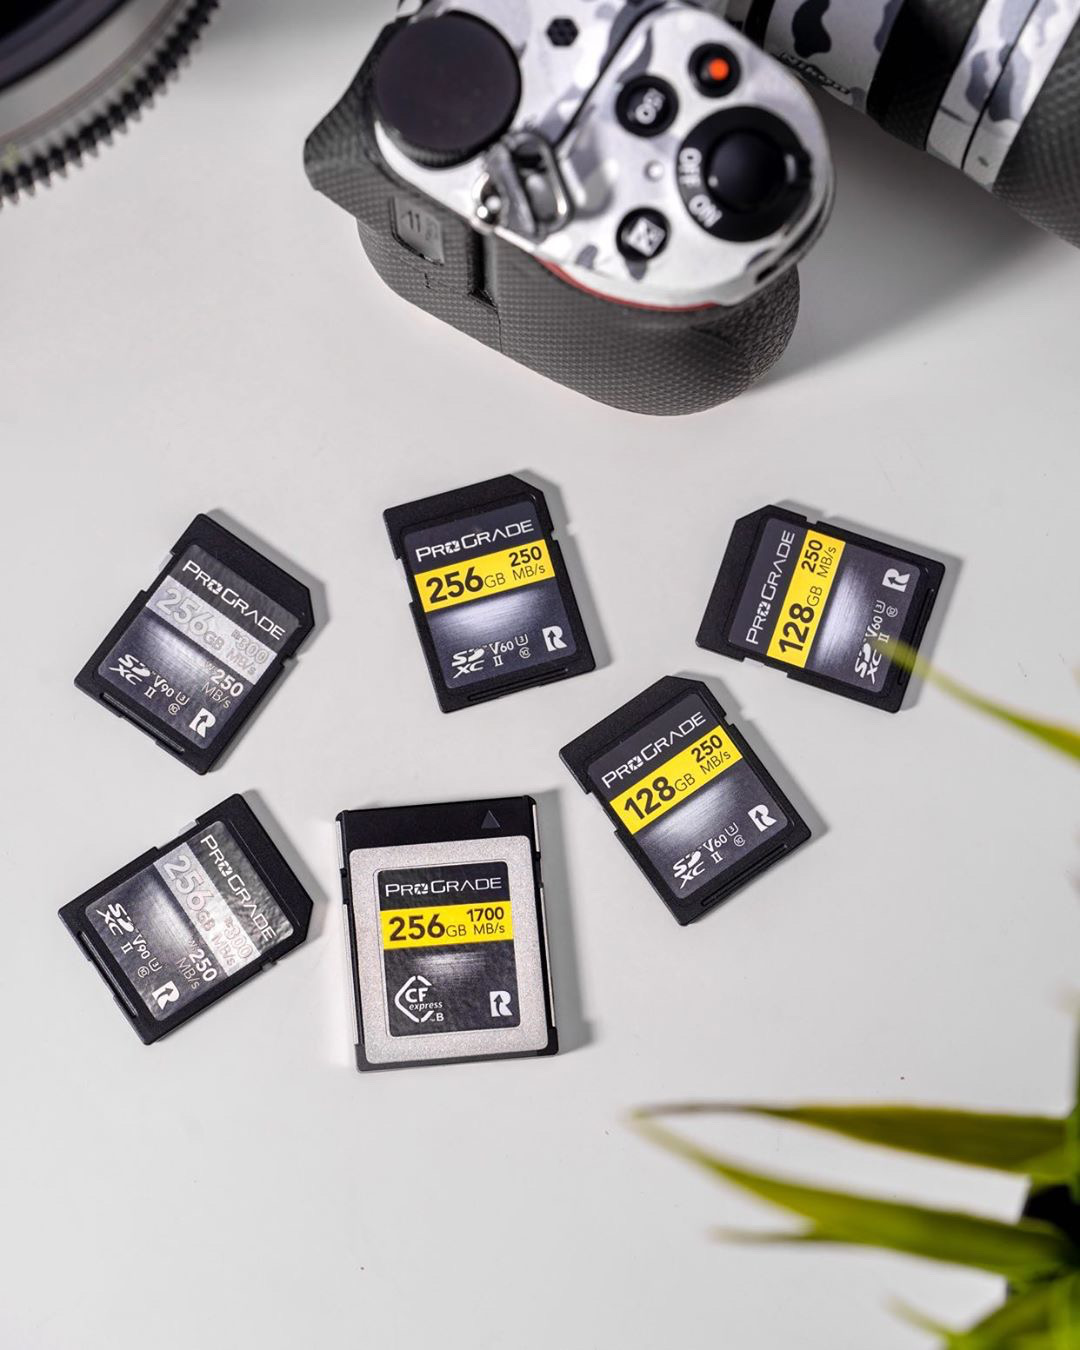 How Not to Run Out of Memory Card Space?